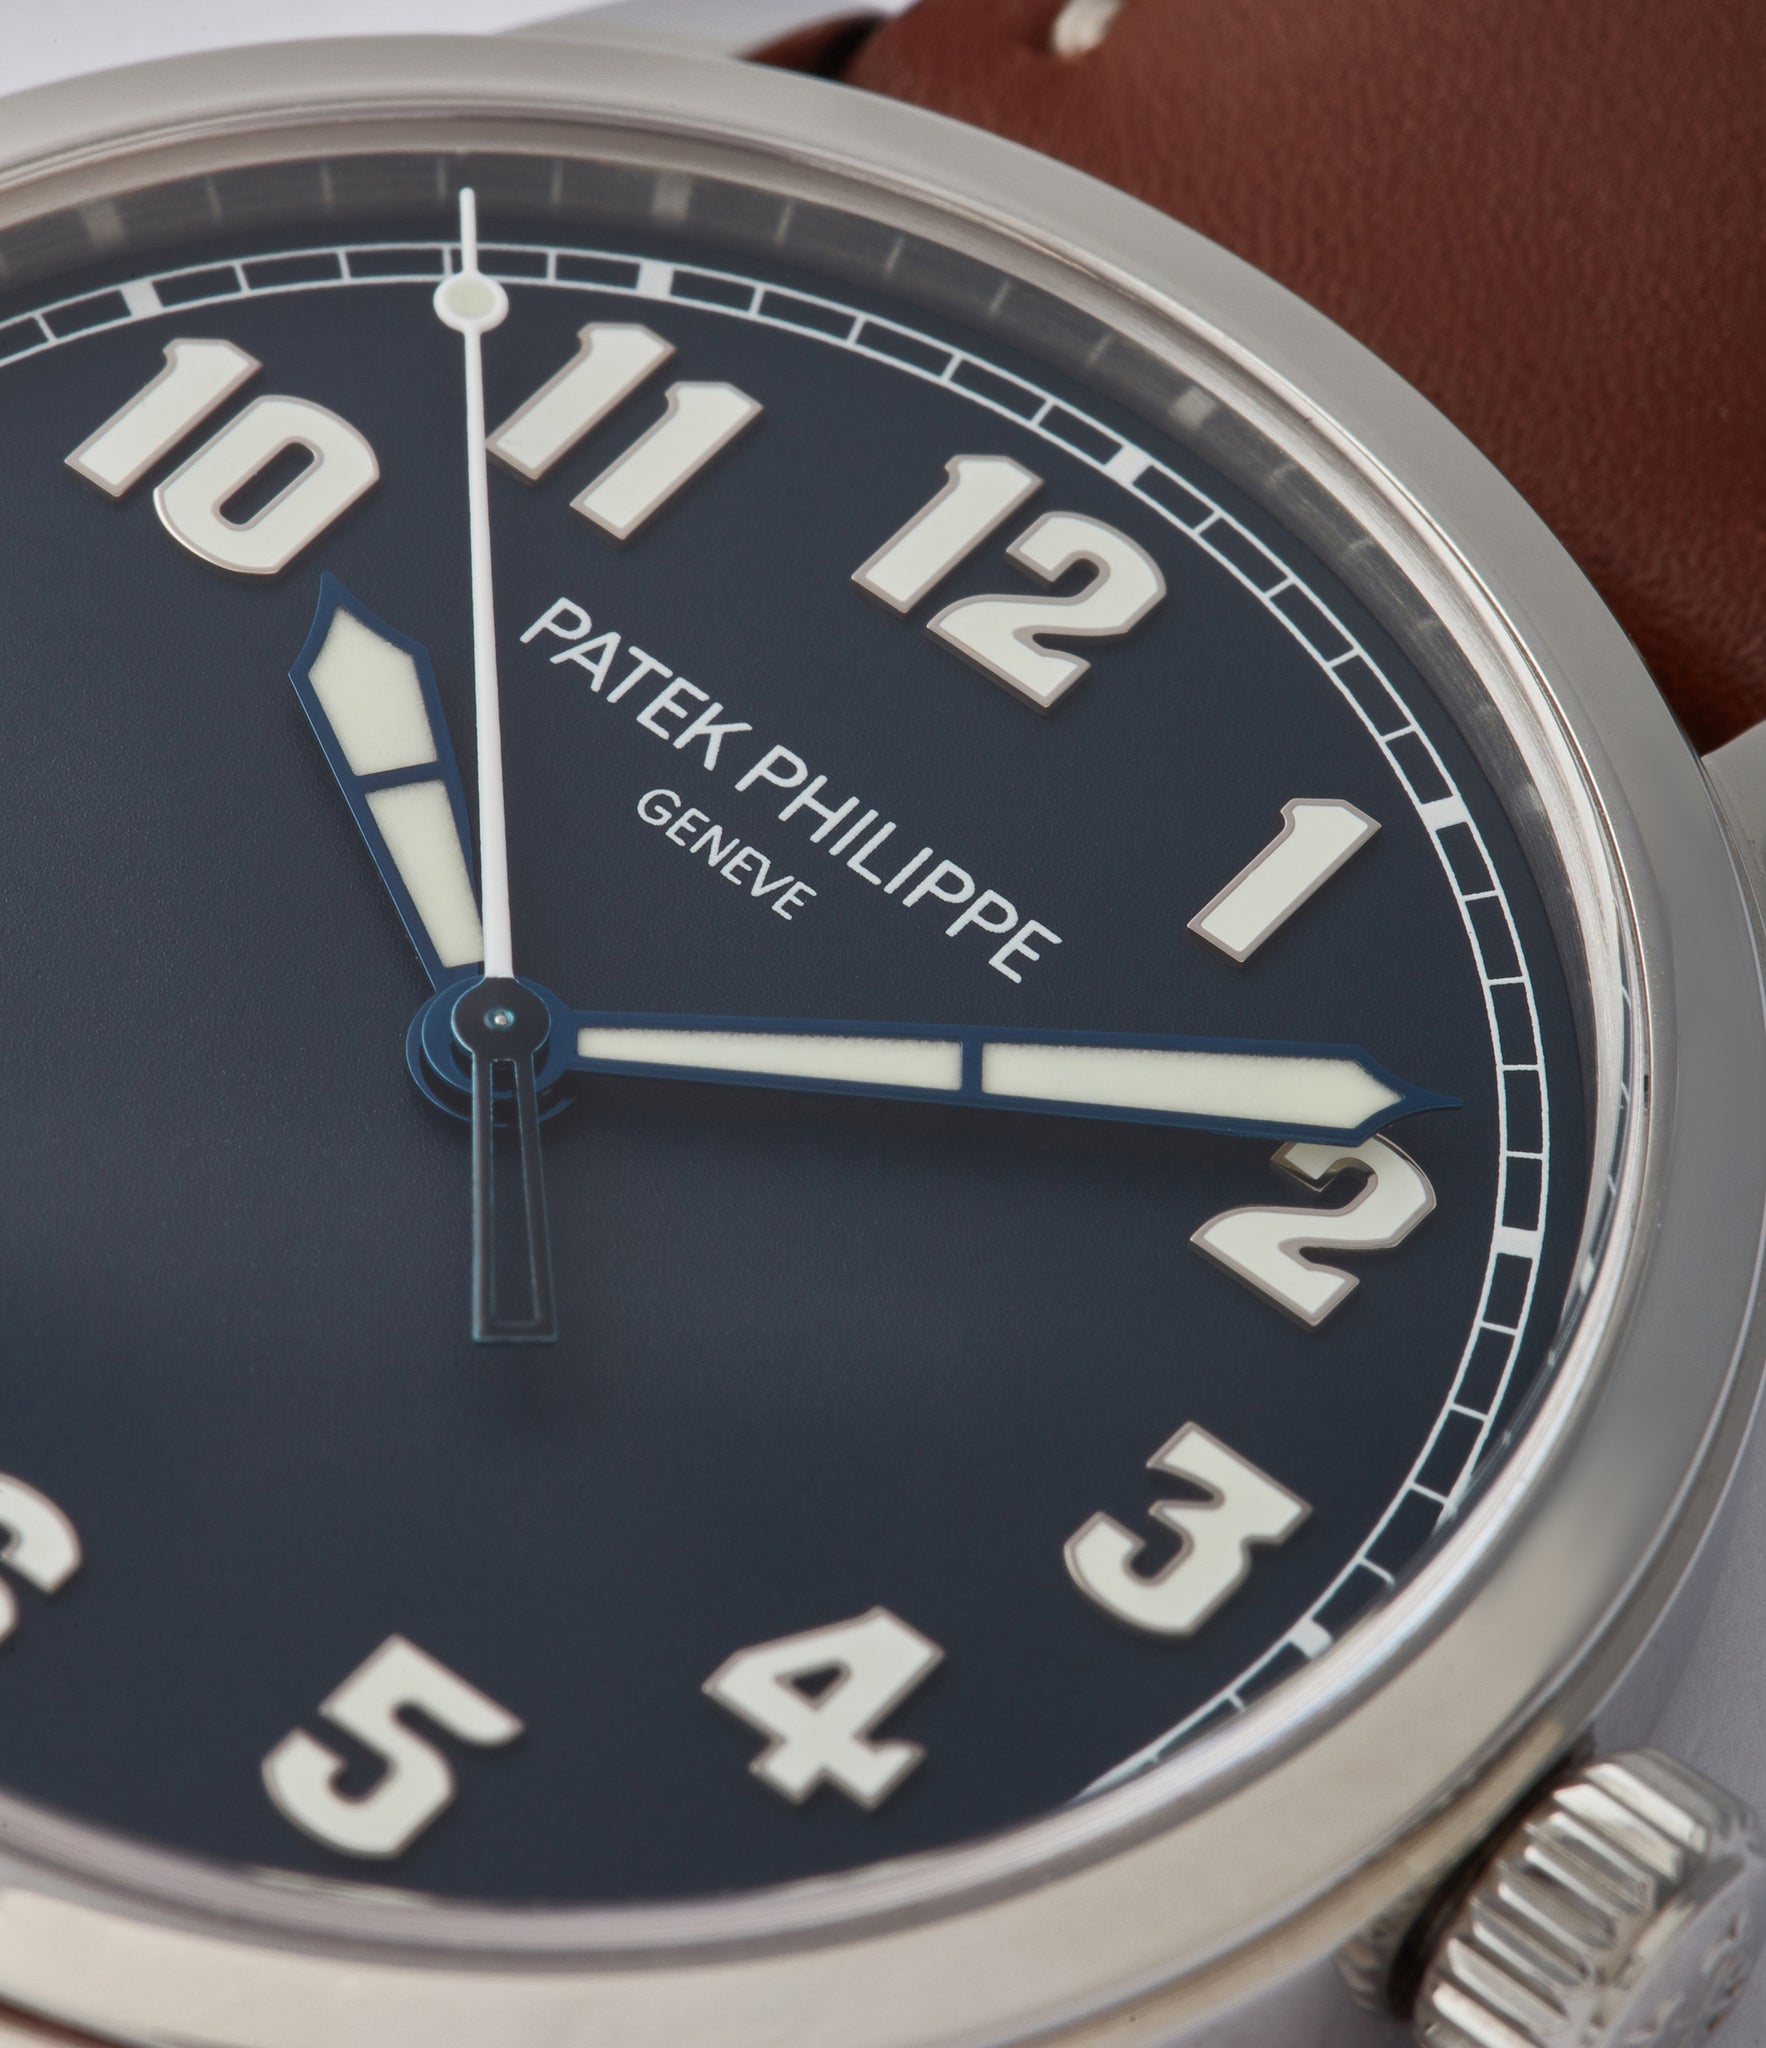 blue lacquer dial Patek Philippe Calatrava Pilot's 5522A-001 time-only pre-owned watch for sale online at A Collected Man London UK specialist 